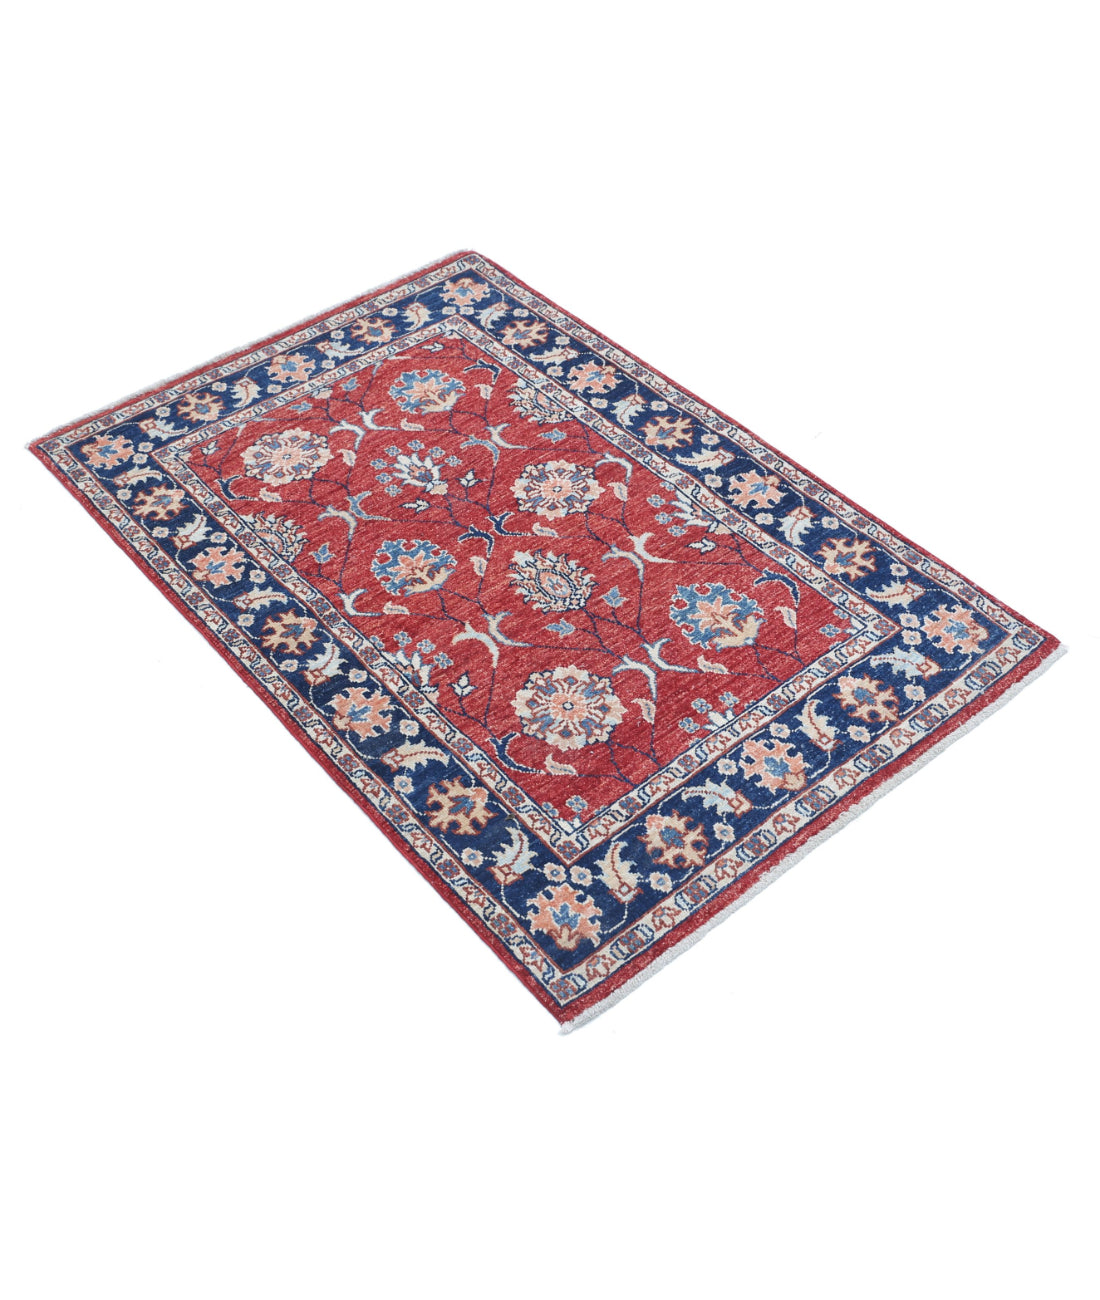 Ziegler 2'9'' X 4'0'' Hand-Knotted Wool Rug 2'9'' x 4'0'' (83 X 120) / Red / Blue